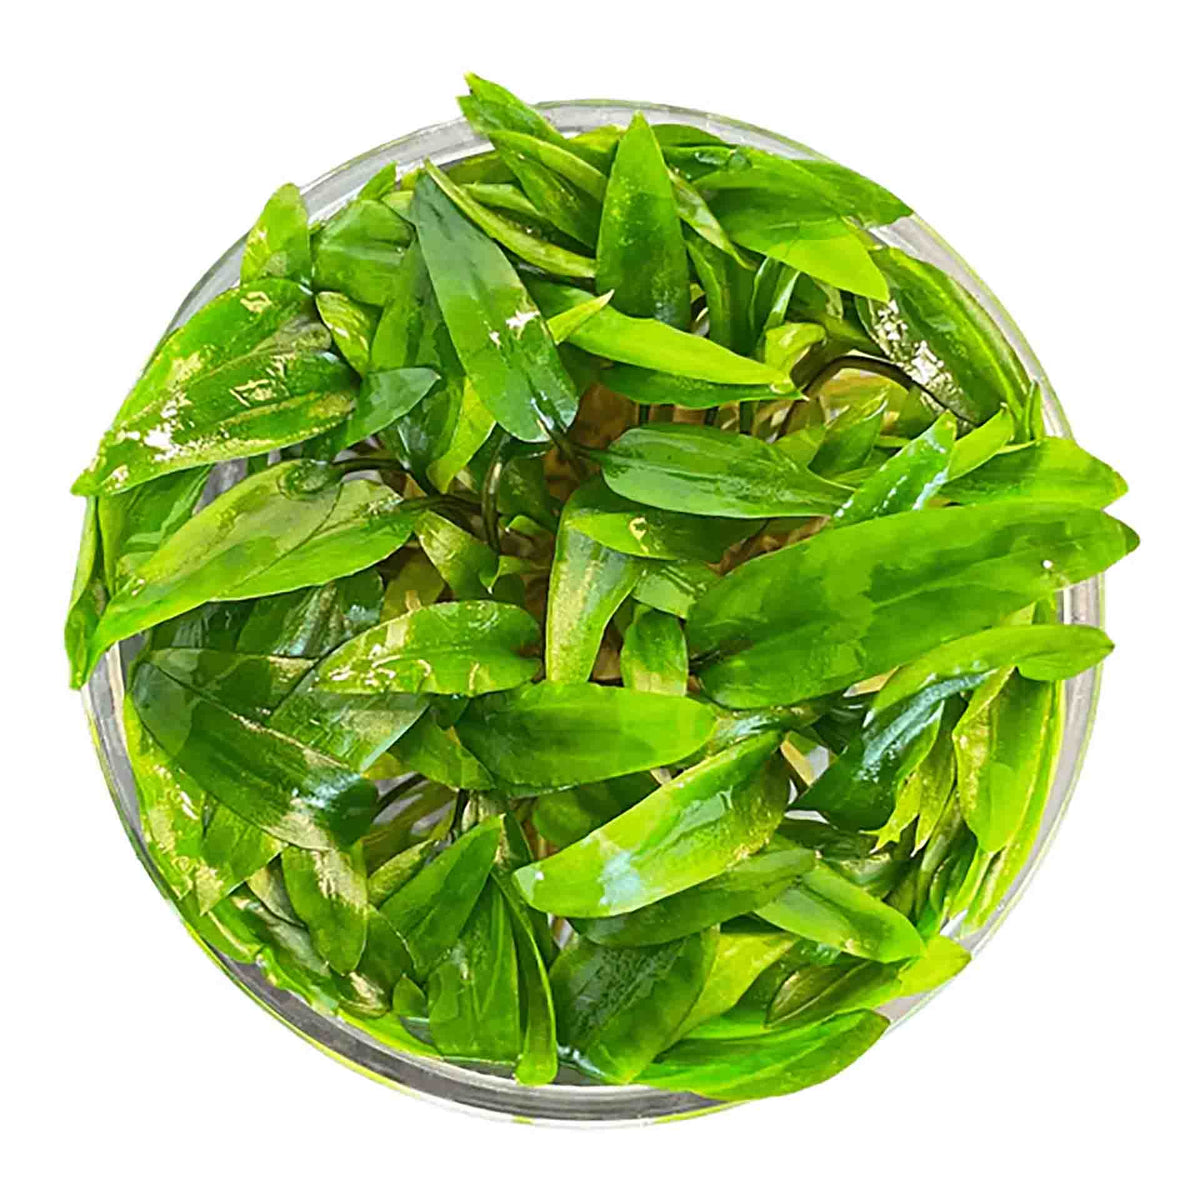 Cryptocoryne Wendtii Live Plant - Tissues Culture